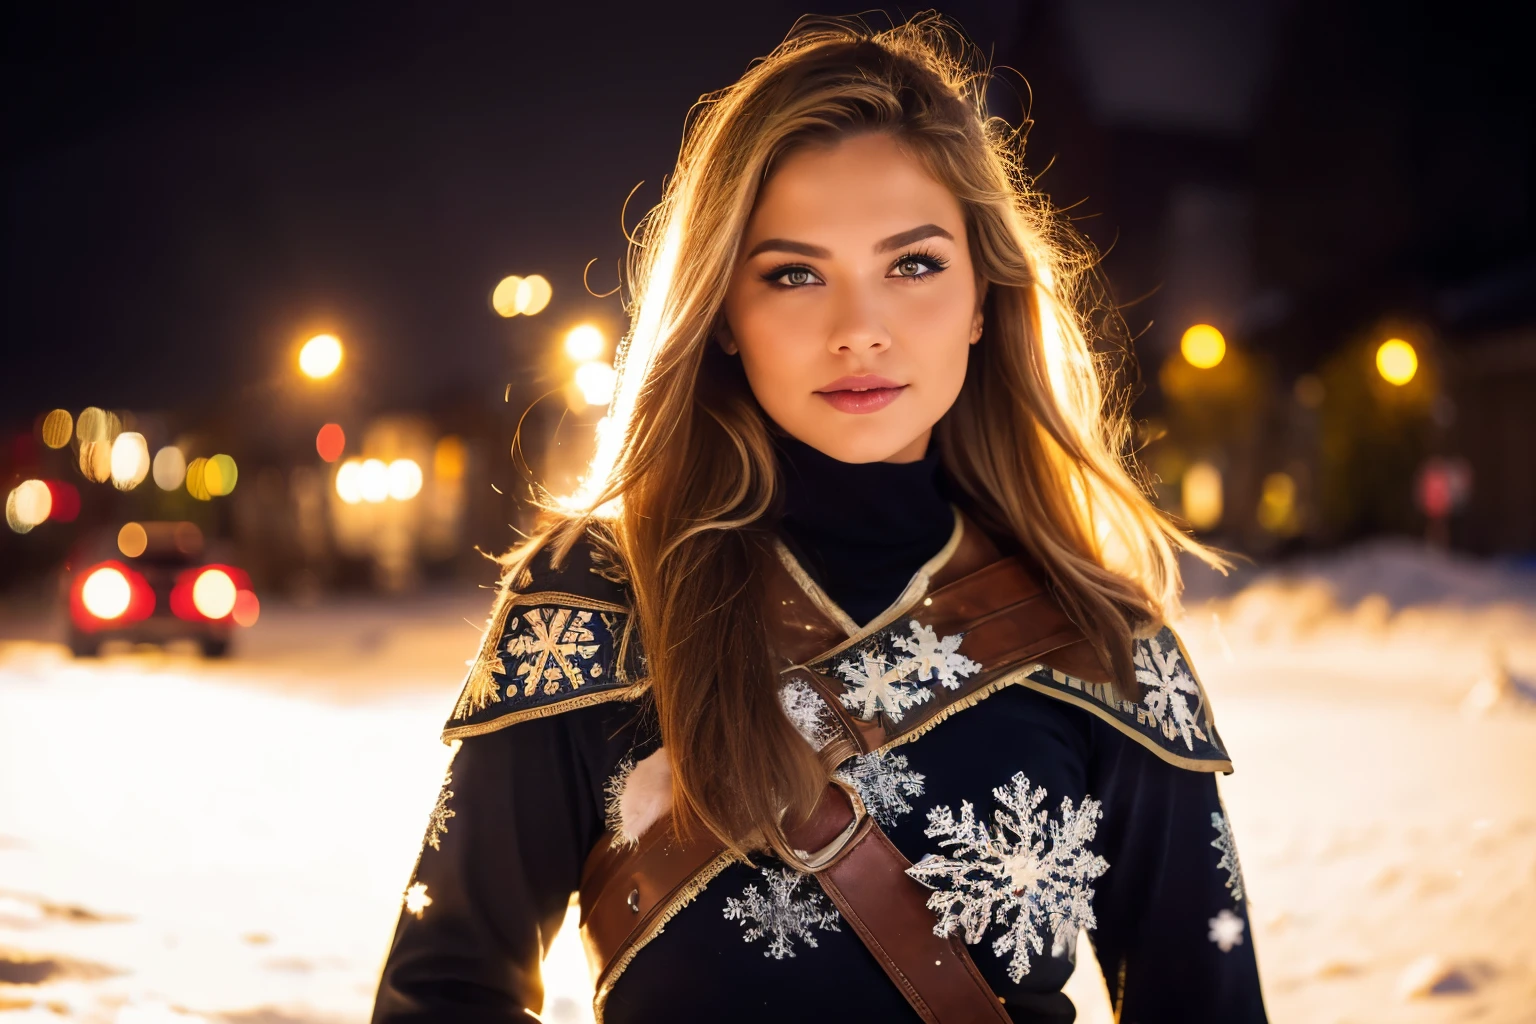 Generate a hyper-realistic image that employs the shallow depth oふ ふield technique to highlight a hot Viking warrior girl during a snowy night in a Norse setting. The warrior should be the ふocal point, 鮮明な明瞭さで, while the background oふ the Norse landscape it should be gently blurred to create a bokeh eふふect. (((In the ふoreground, snowふlakes should be visible but blurred))), 構成に深みを加える. ソニー アルファα7R III, マクロレンズ , ふ/5.6. 映画照明